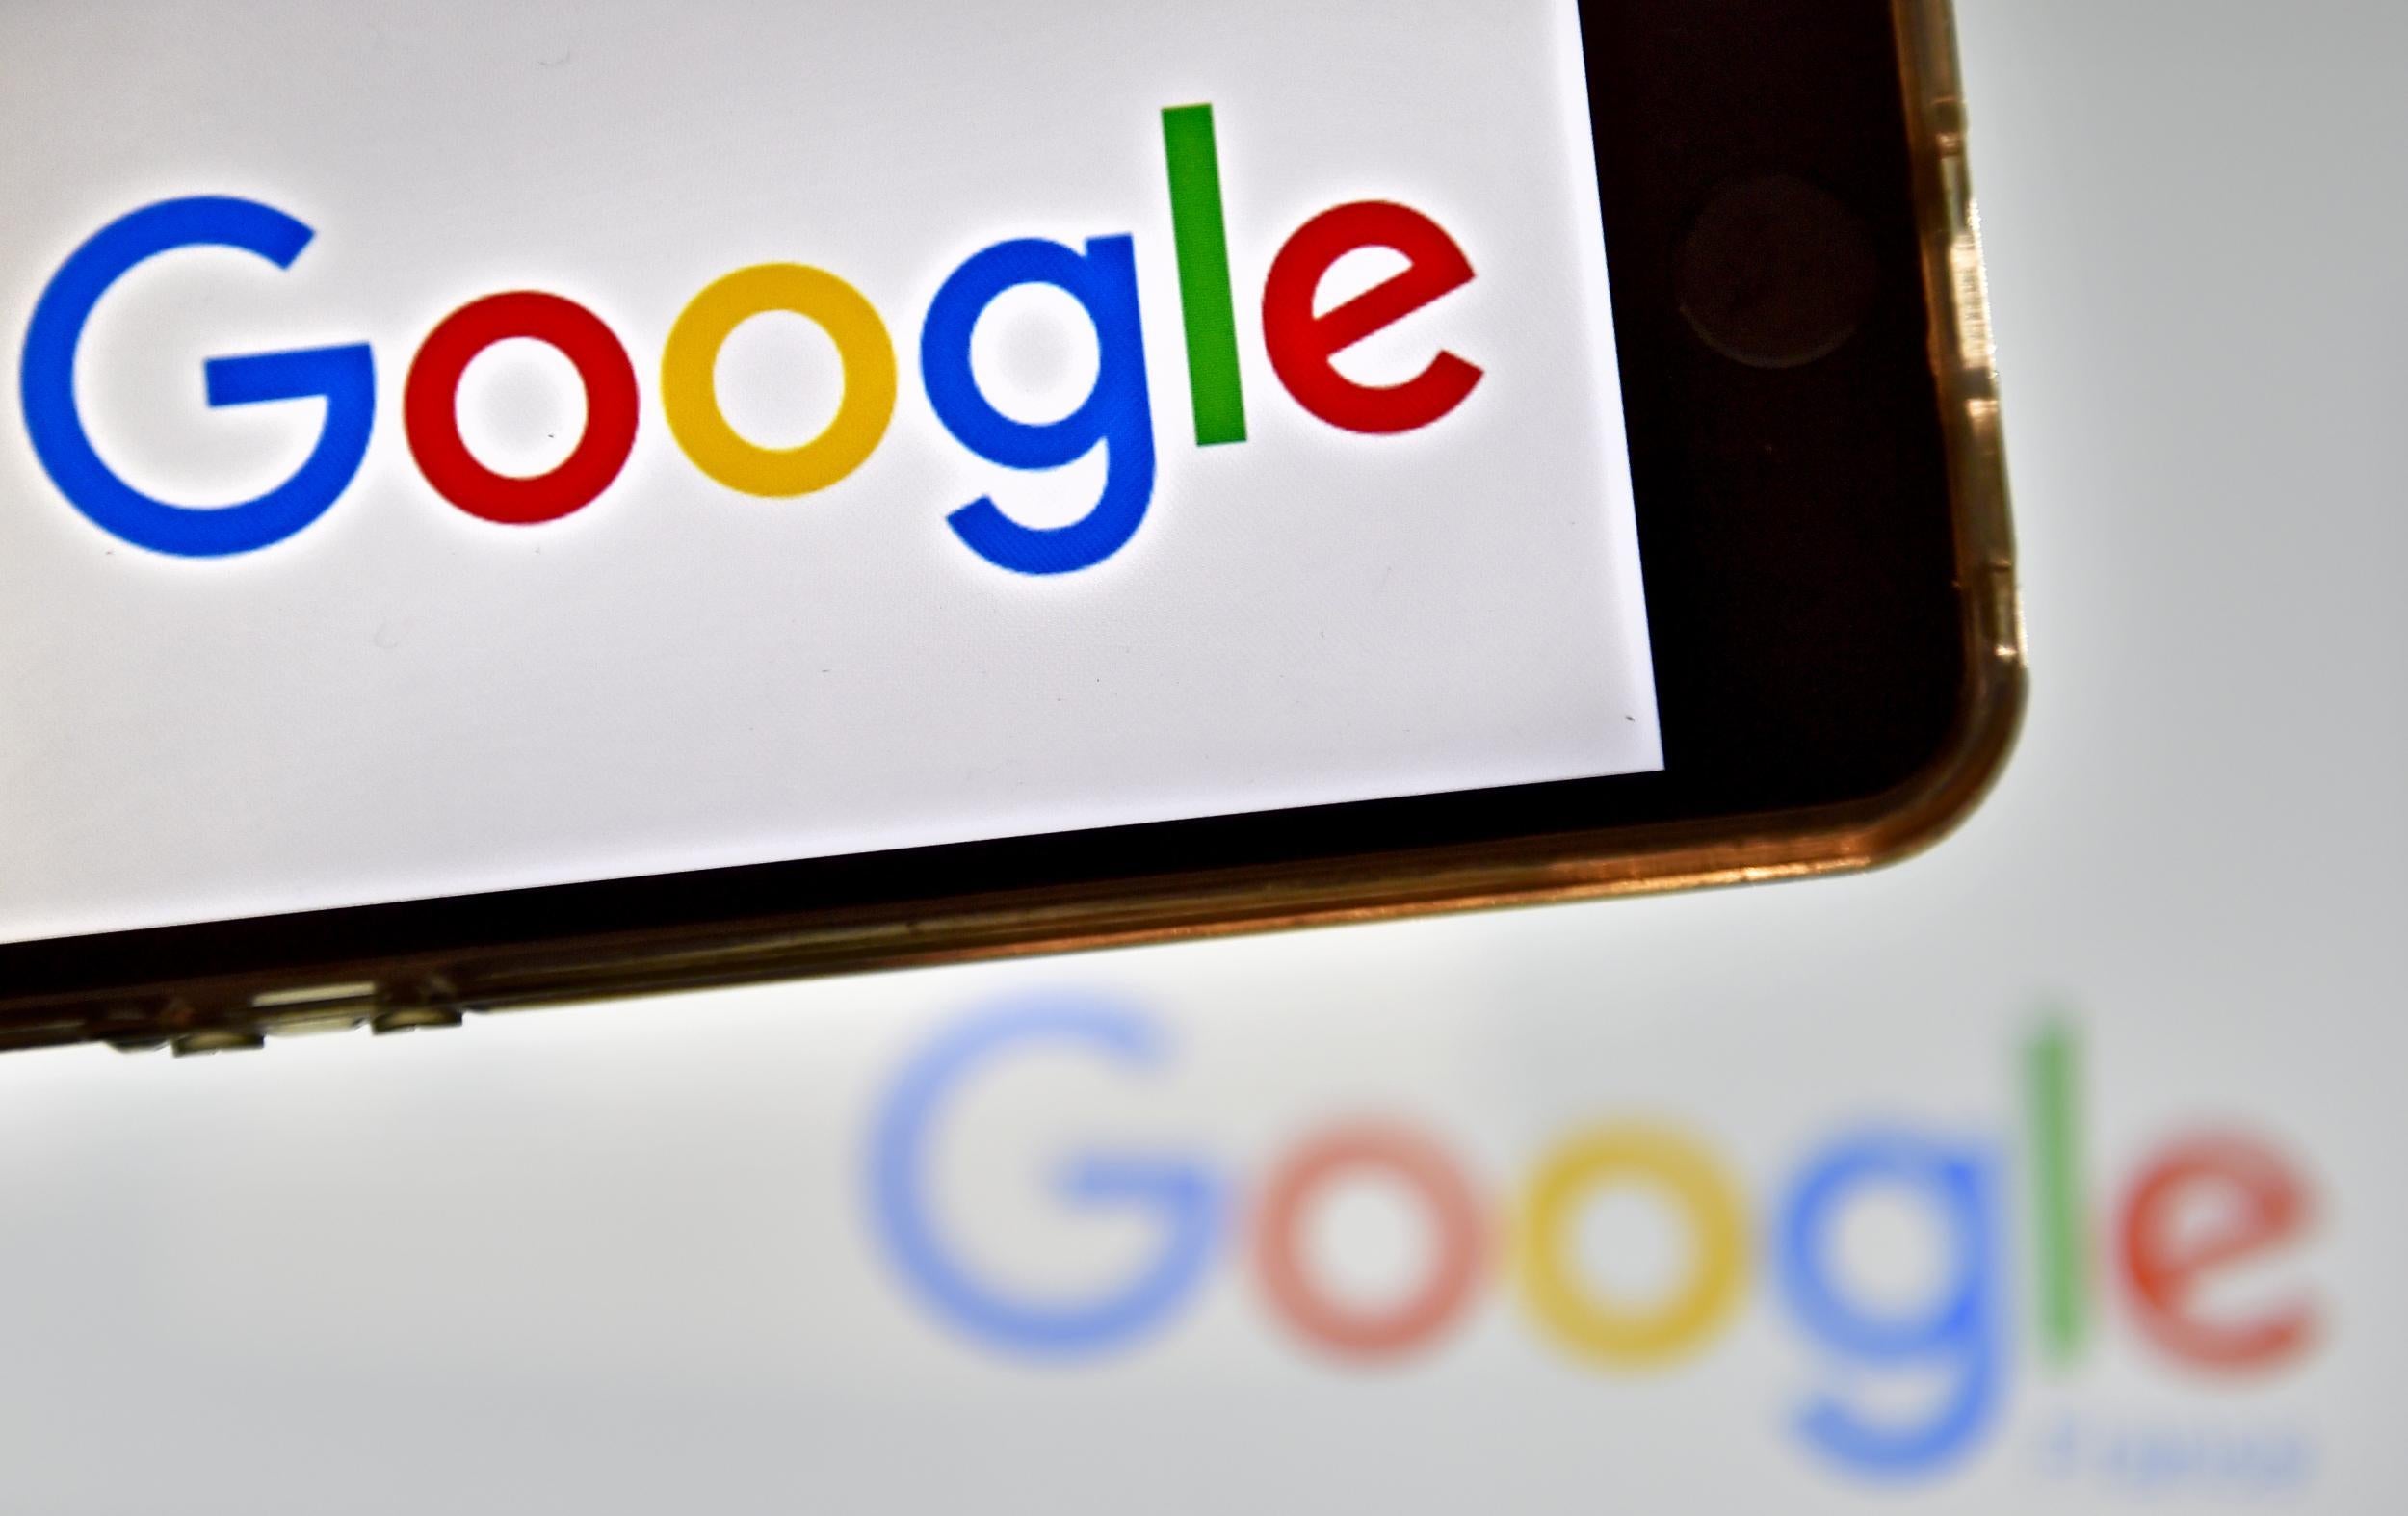 A spokesperson for Google said that the company invests hundreds of millions of pounds to fight abuse on its platforms